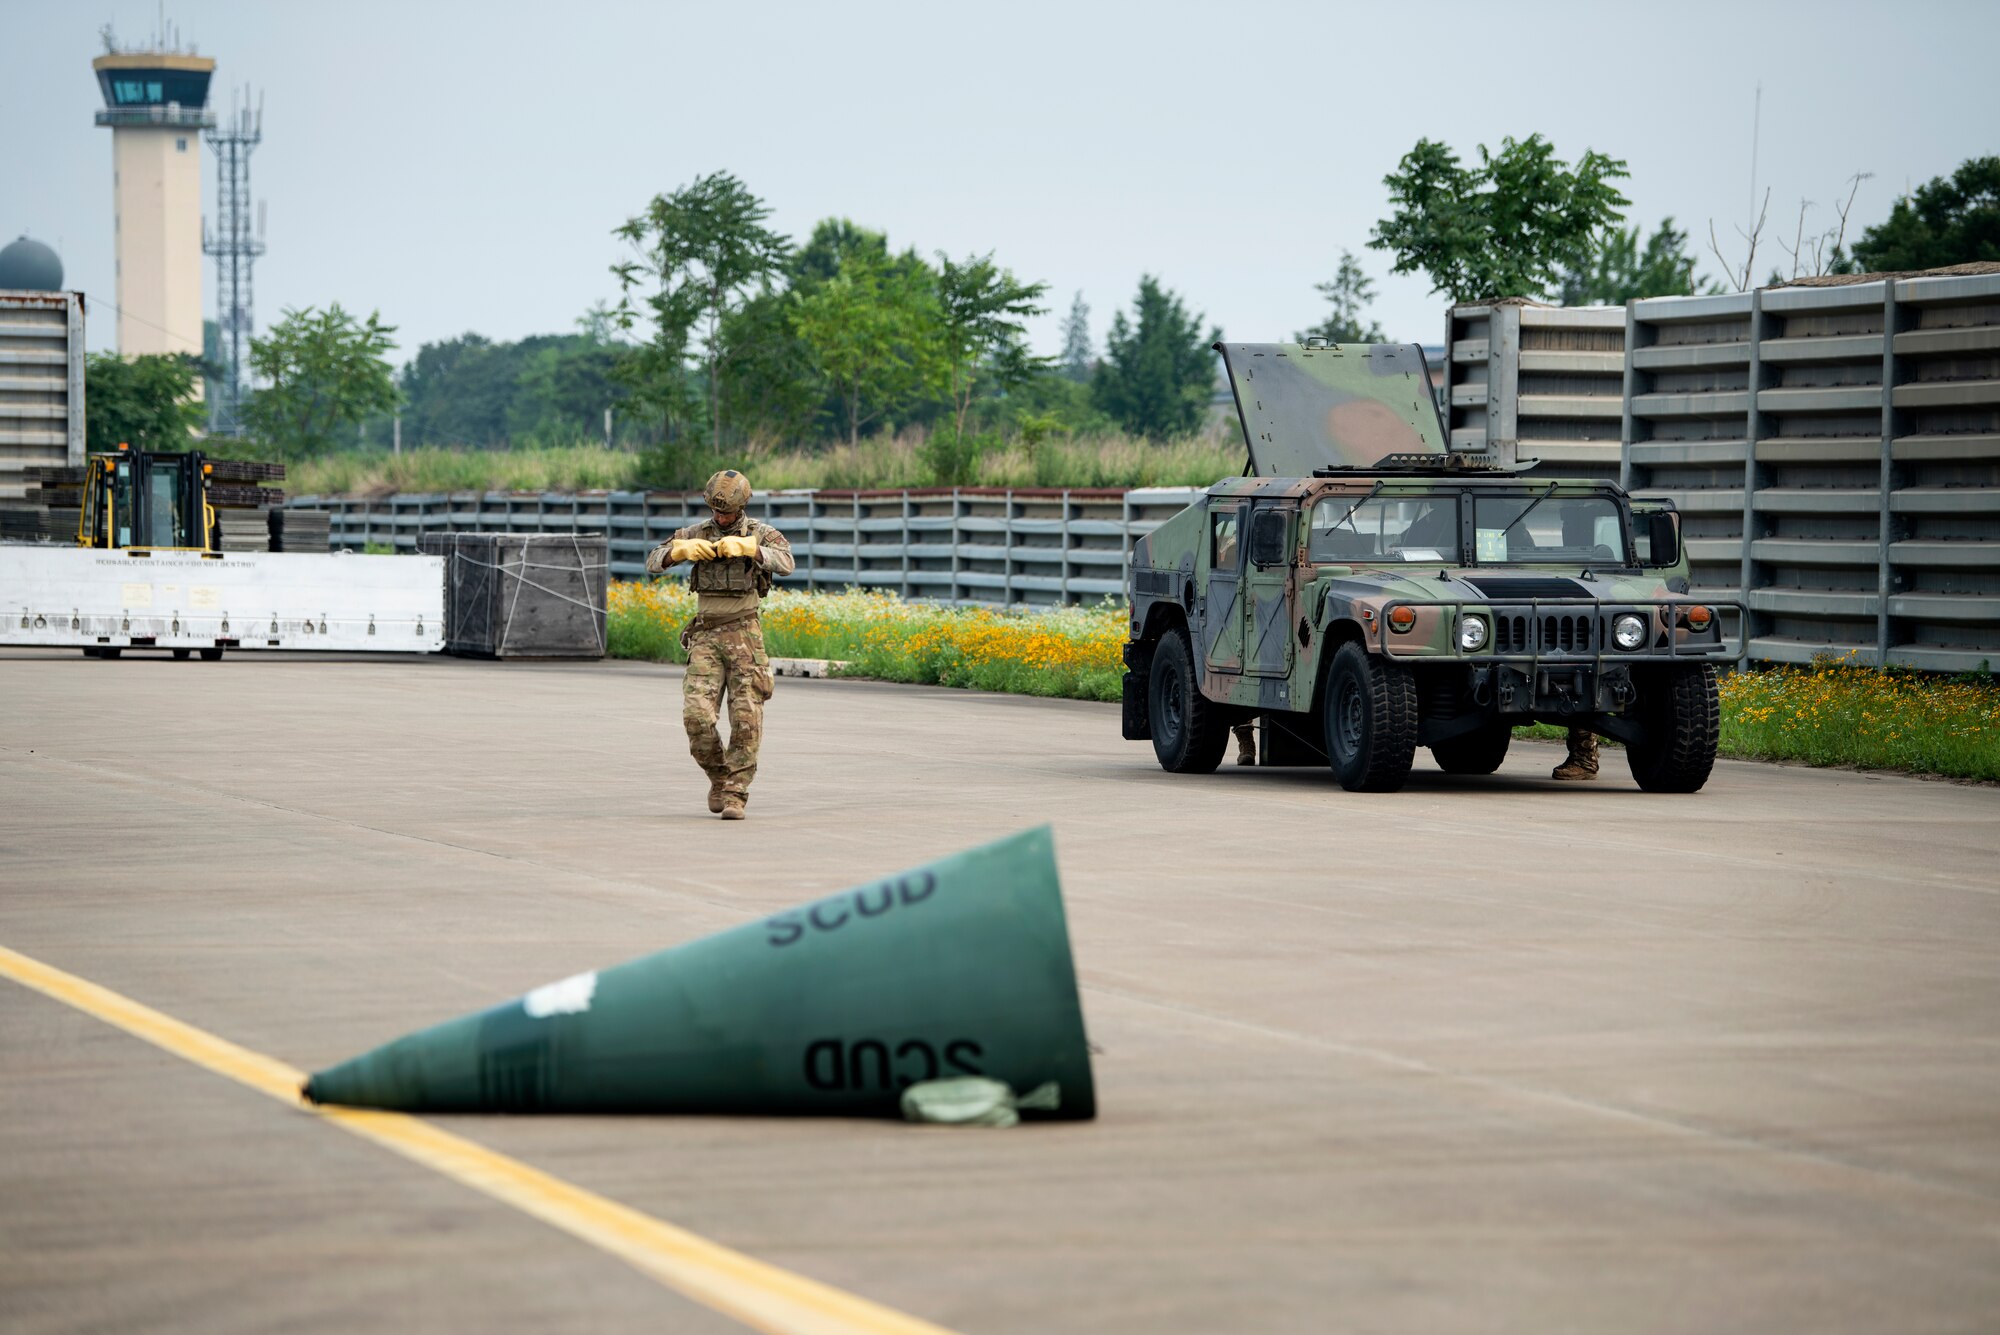 U.S. Air Force Staff Sgt. Michael Augustus, a 35th Civil Engineer Squadron, Explosive Ordnance Disposal technician from Misawa Air Base, Japan, prepares to respond to a mock chemical weapon disposal scenario at Suwon Air Base, Republic of Korea, July 6, 2022.